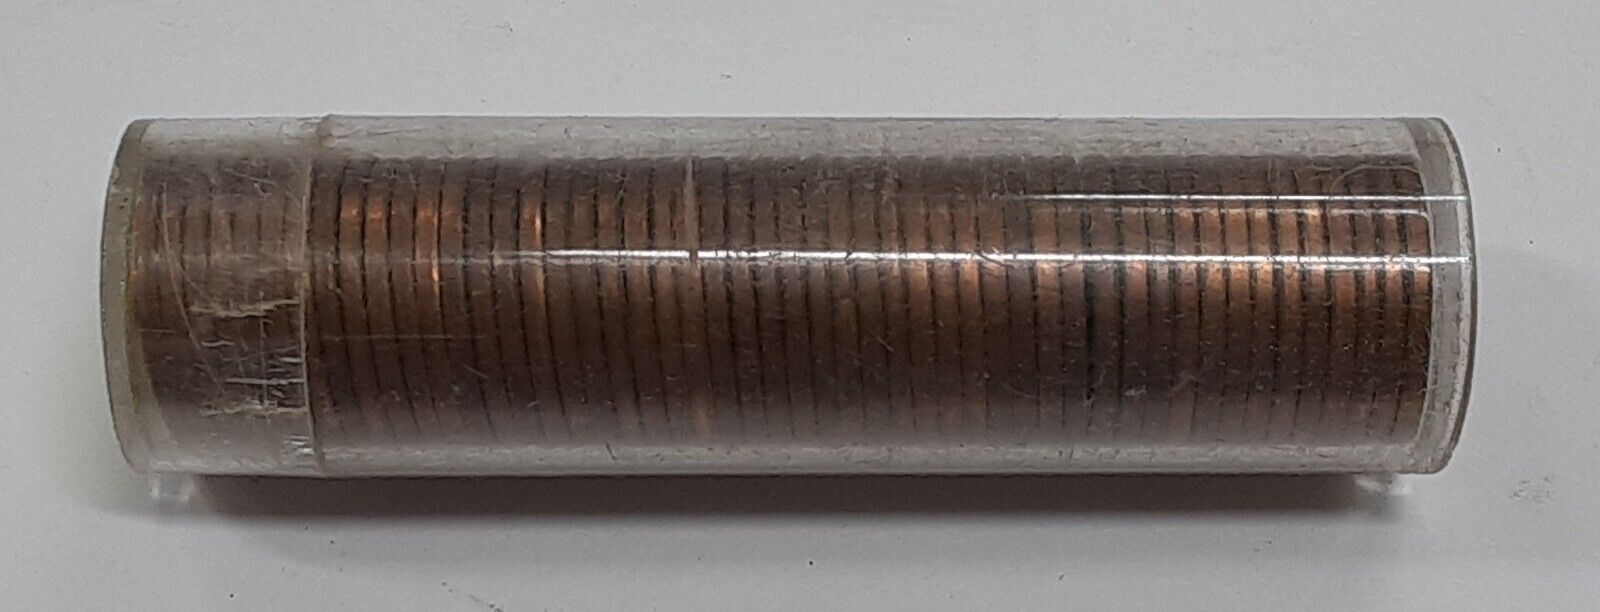 1945 Lincoln Cent Roll - 50 UNC Coins Total in Coin Tube - Toned